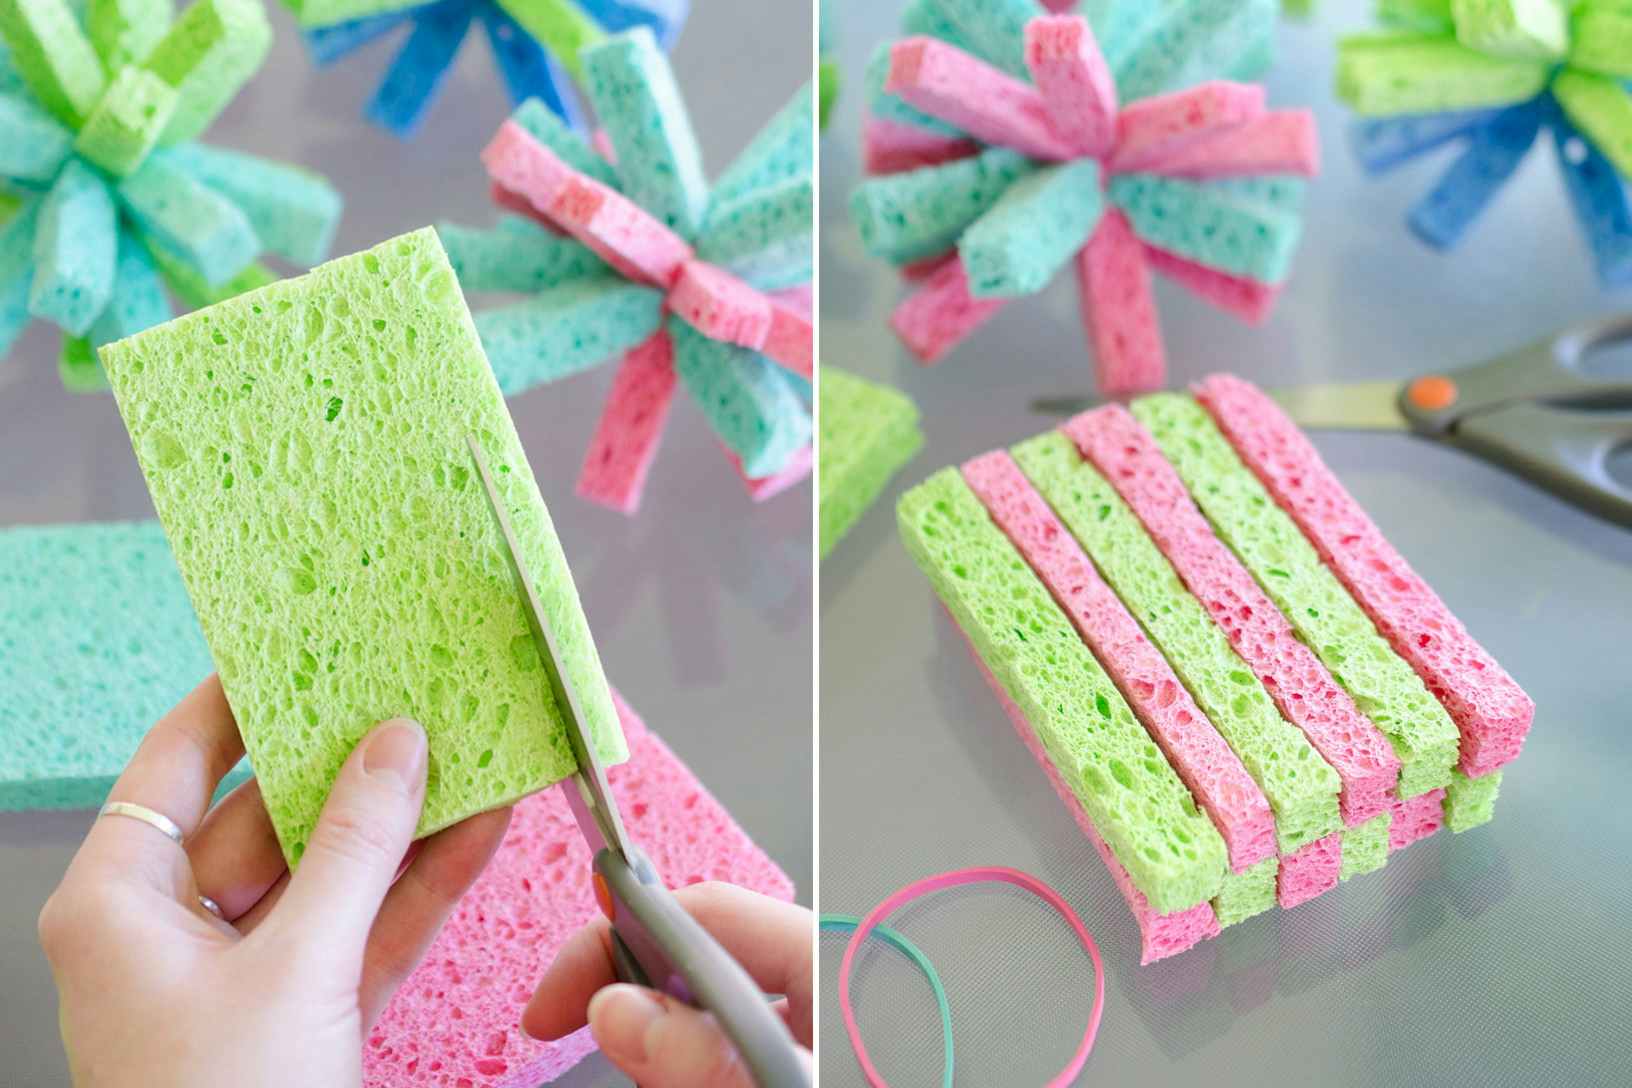 A person using scissors to cut colorful sponges into strips and stacking them with alternating colors on a table next to some completed D...